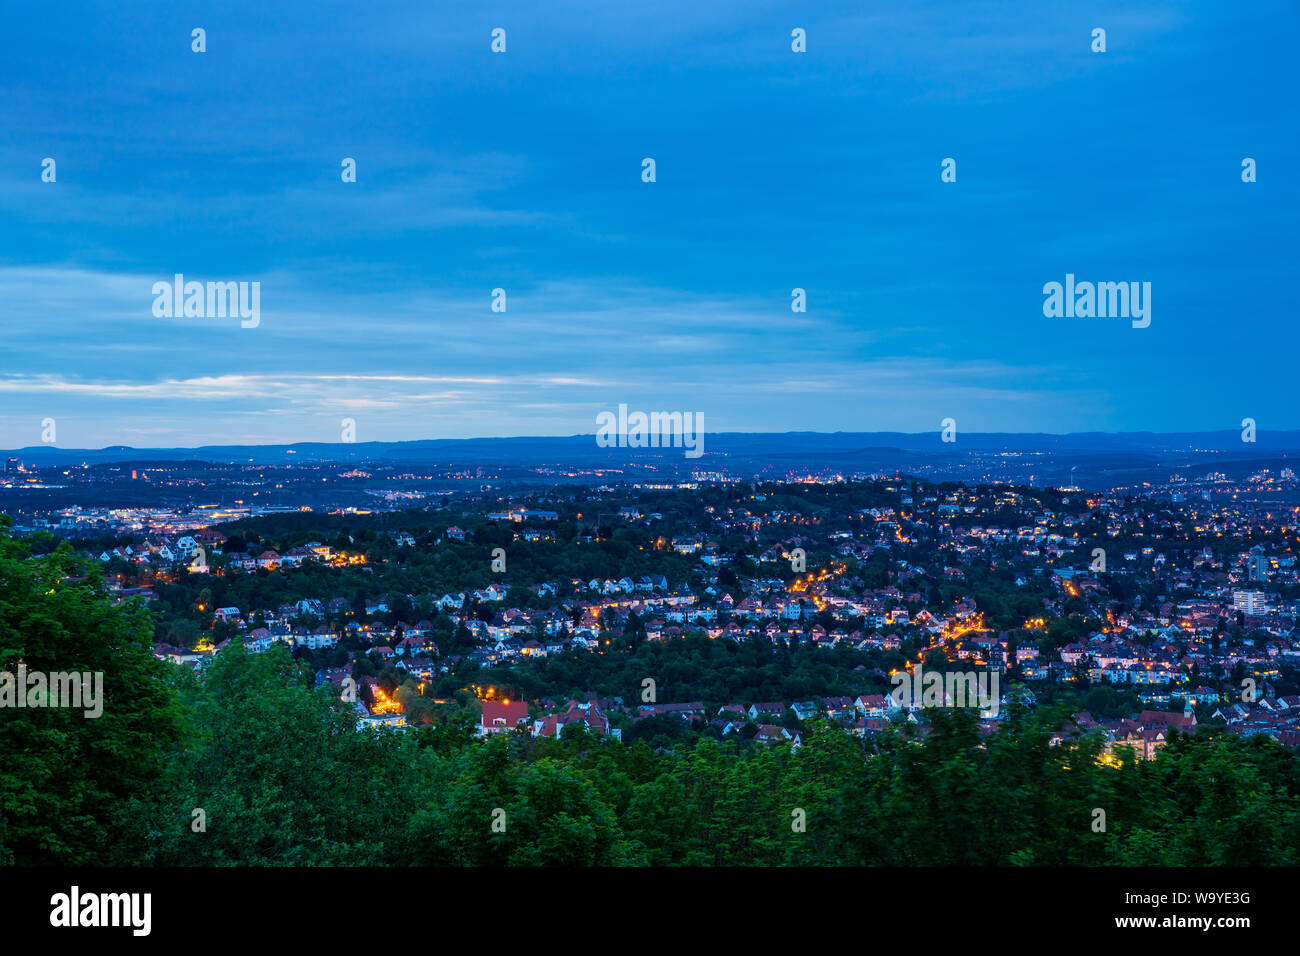 Germany, Villa quarter of city stuttgart district west from peak of mount shards in magical twilight mood by night surrounded by green nature landscap Stock Photo